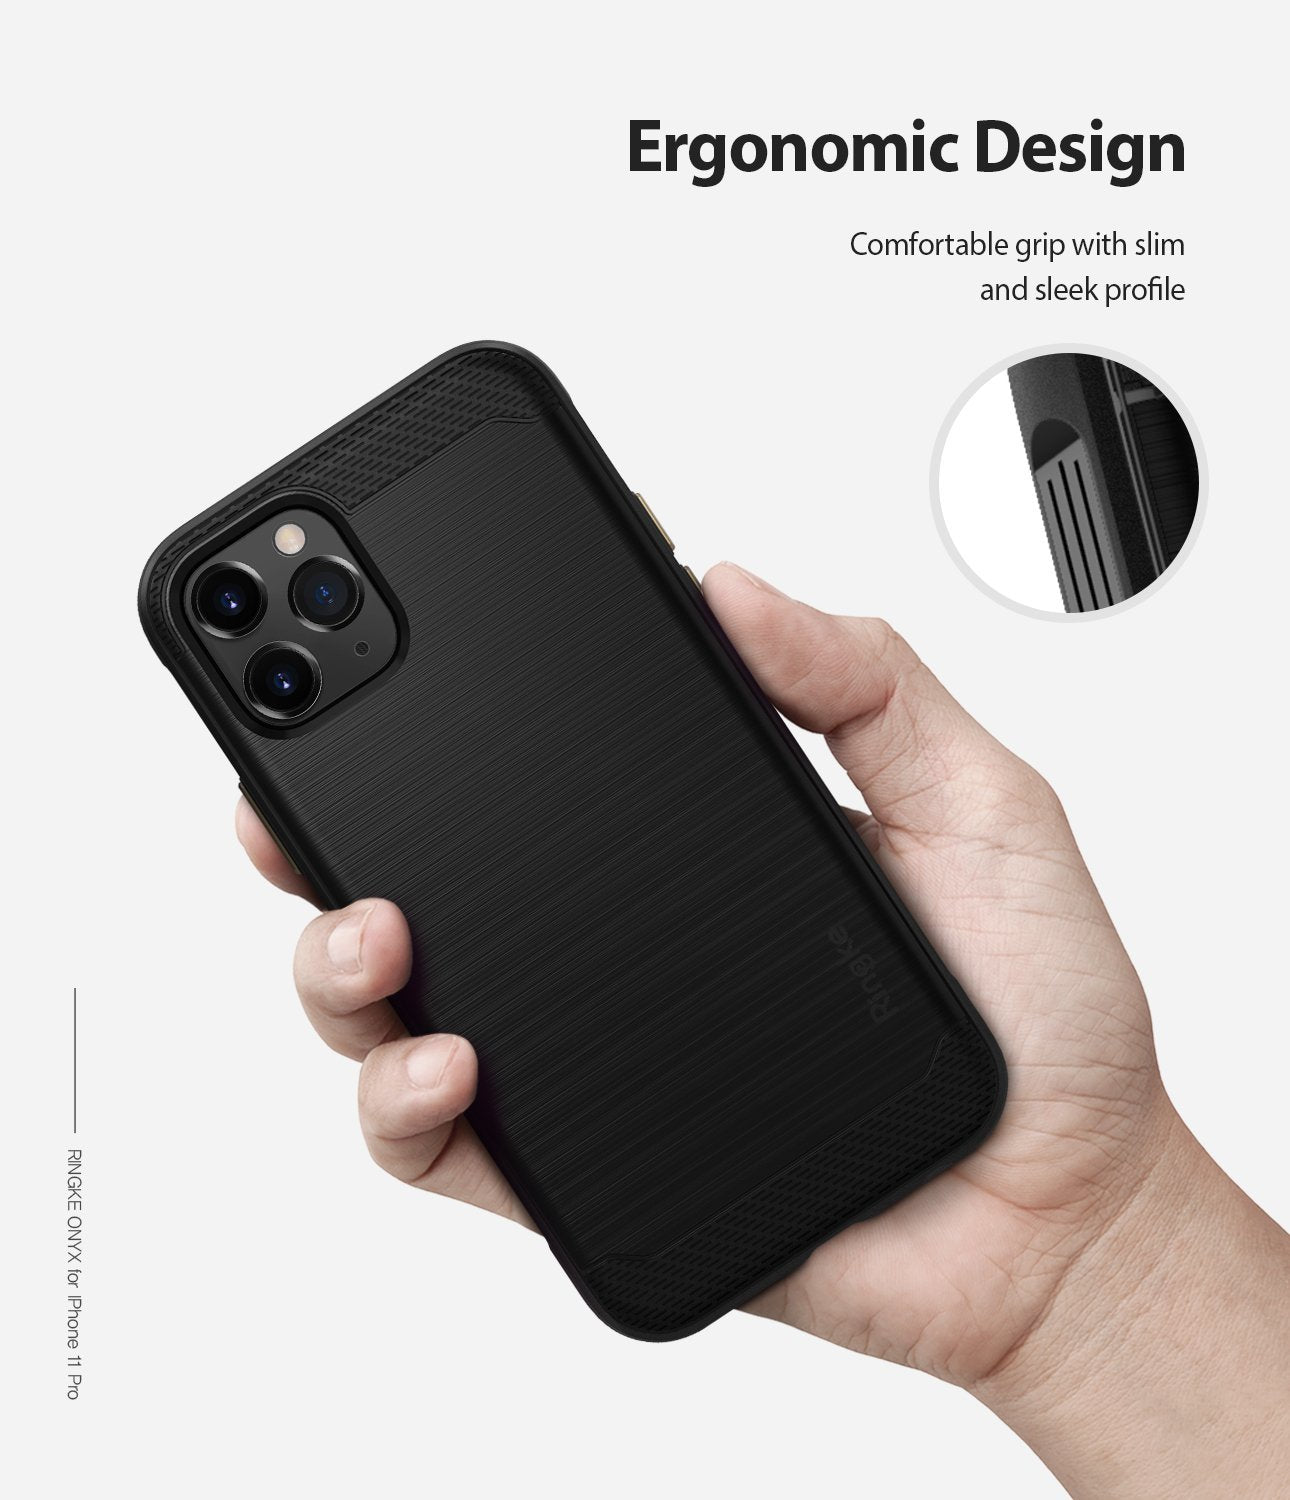 Ringke Onyx Case compatible with iPhone 11 Pro Max Black enhanced grip design